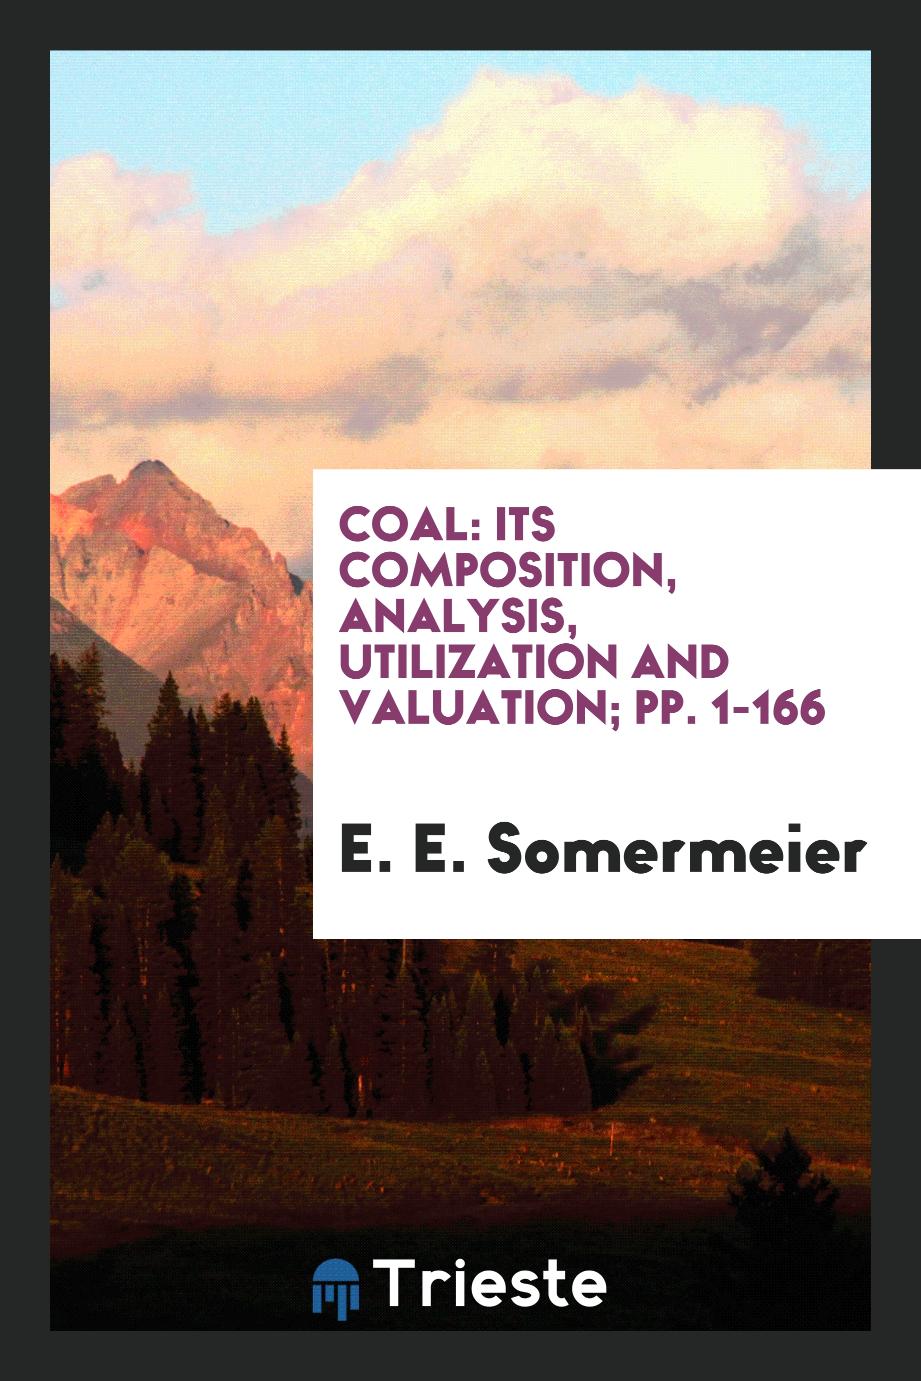 Coal: Its Composition, Analysis, Utilization and Valuation; pp. 1-166